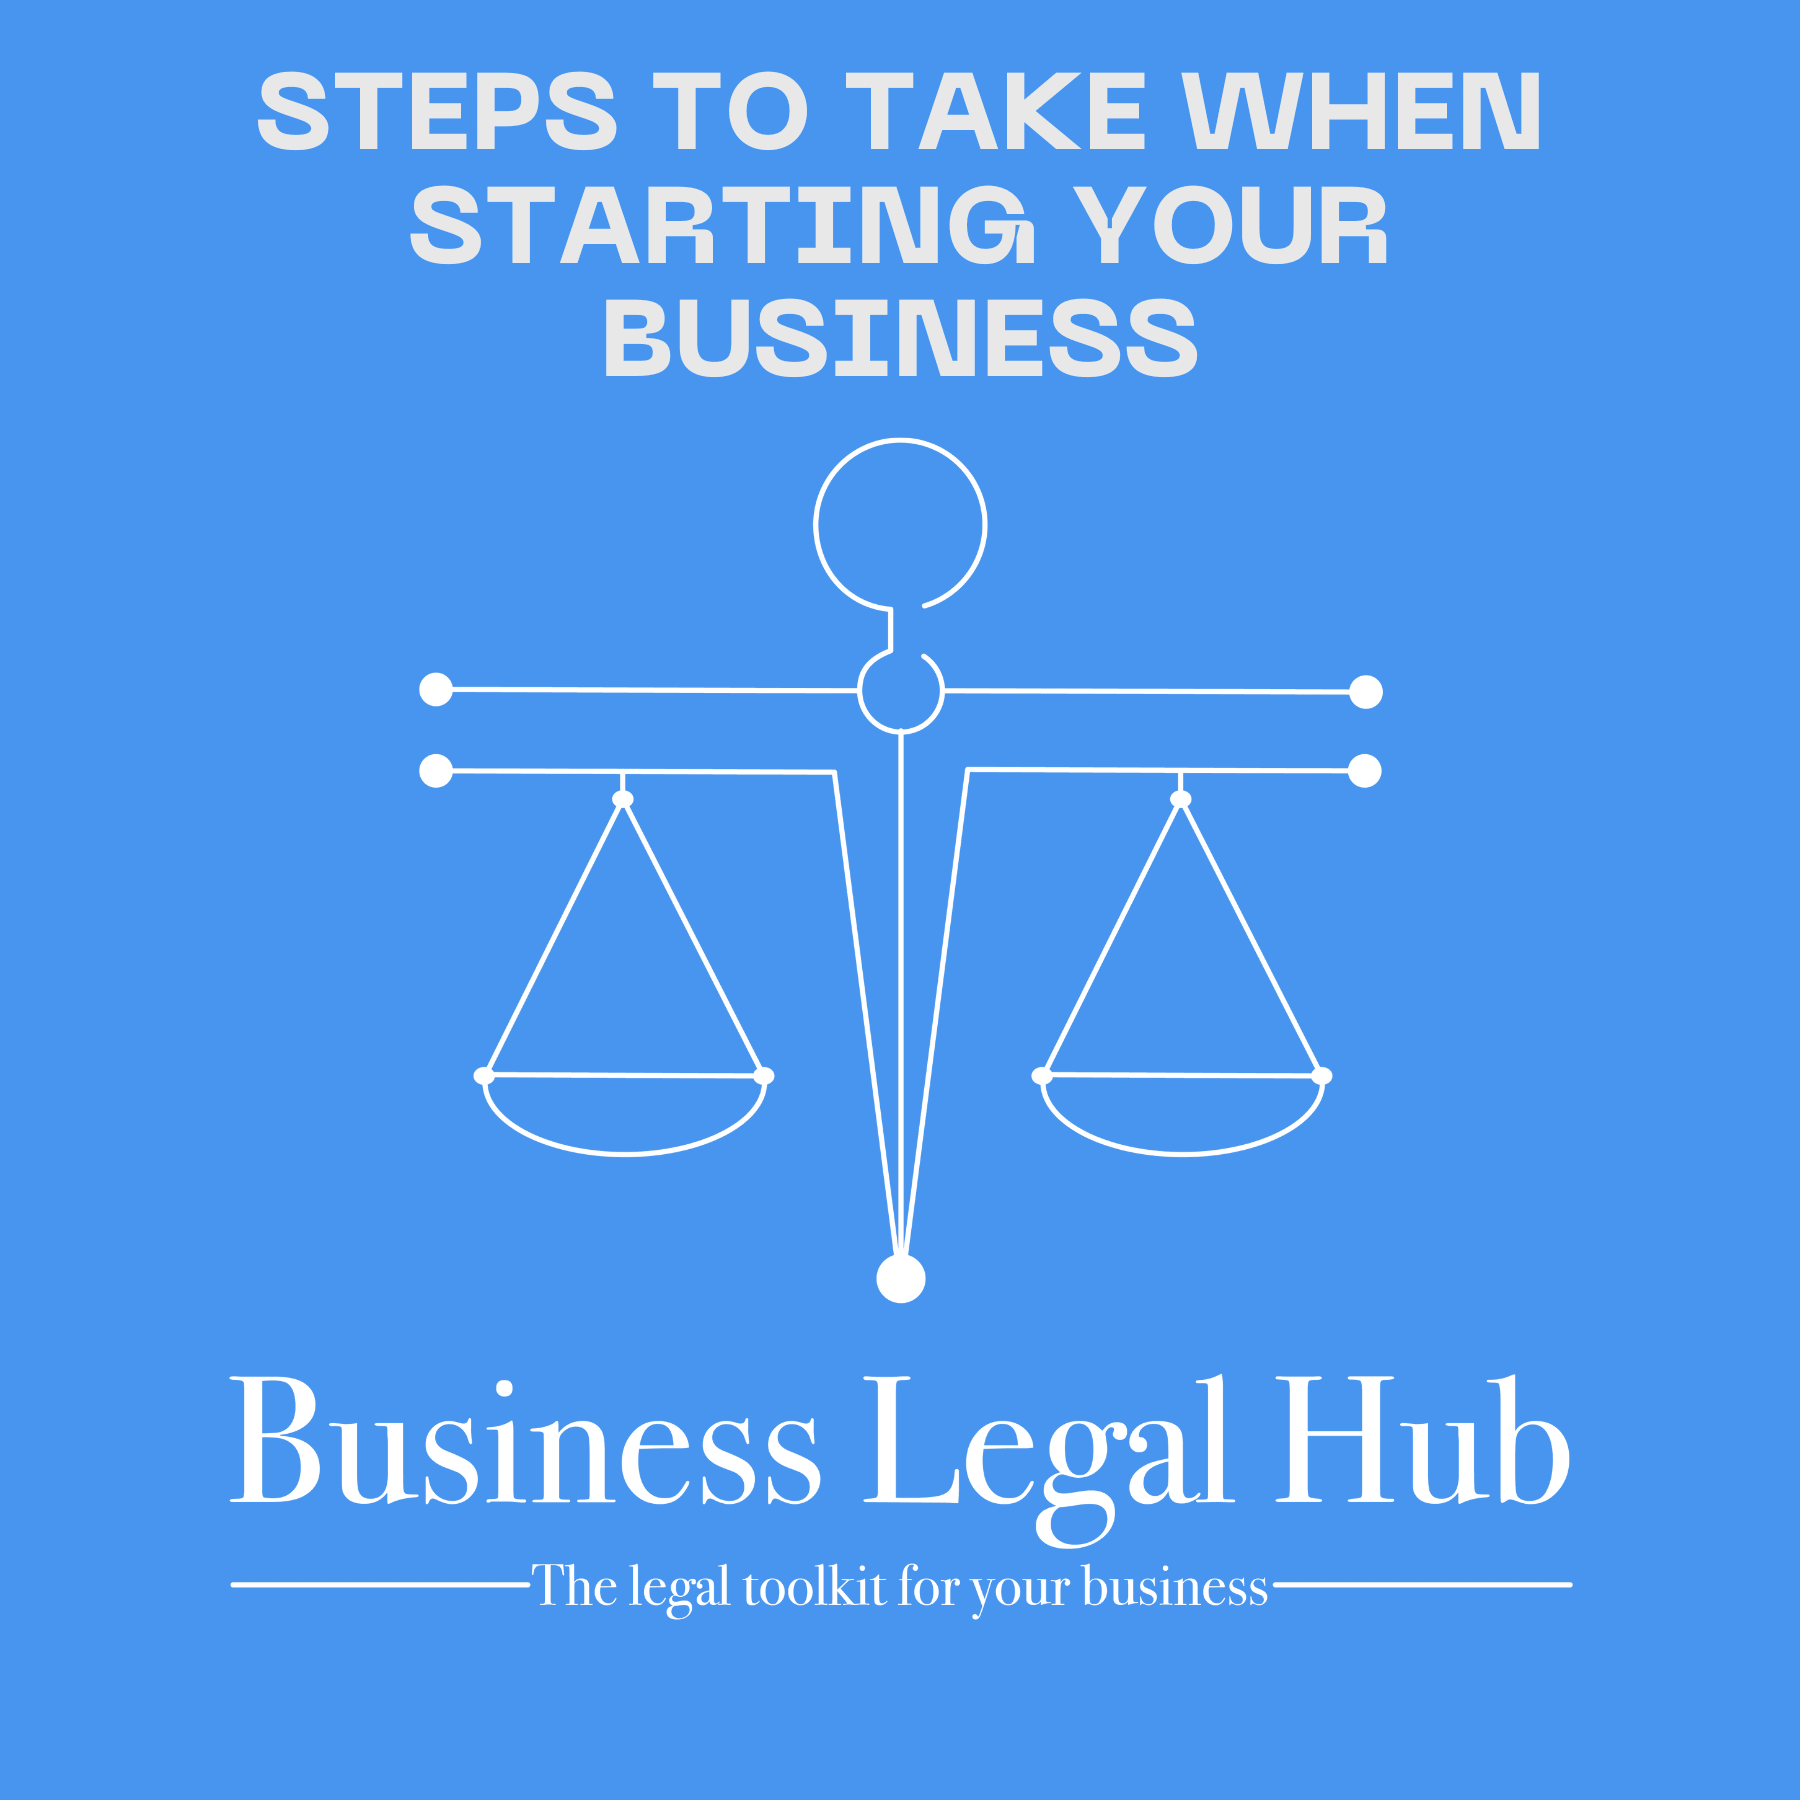 Steps to Take When Starting Your Business - Business Legal Hub